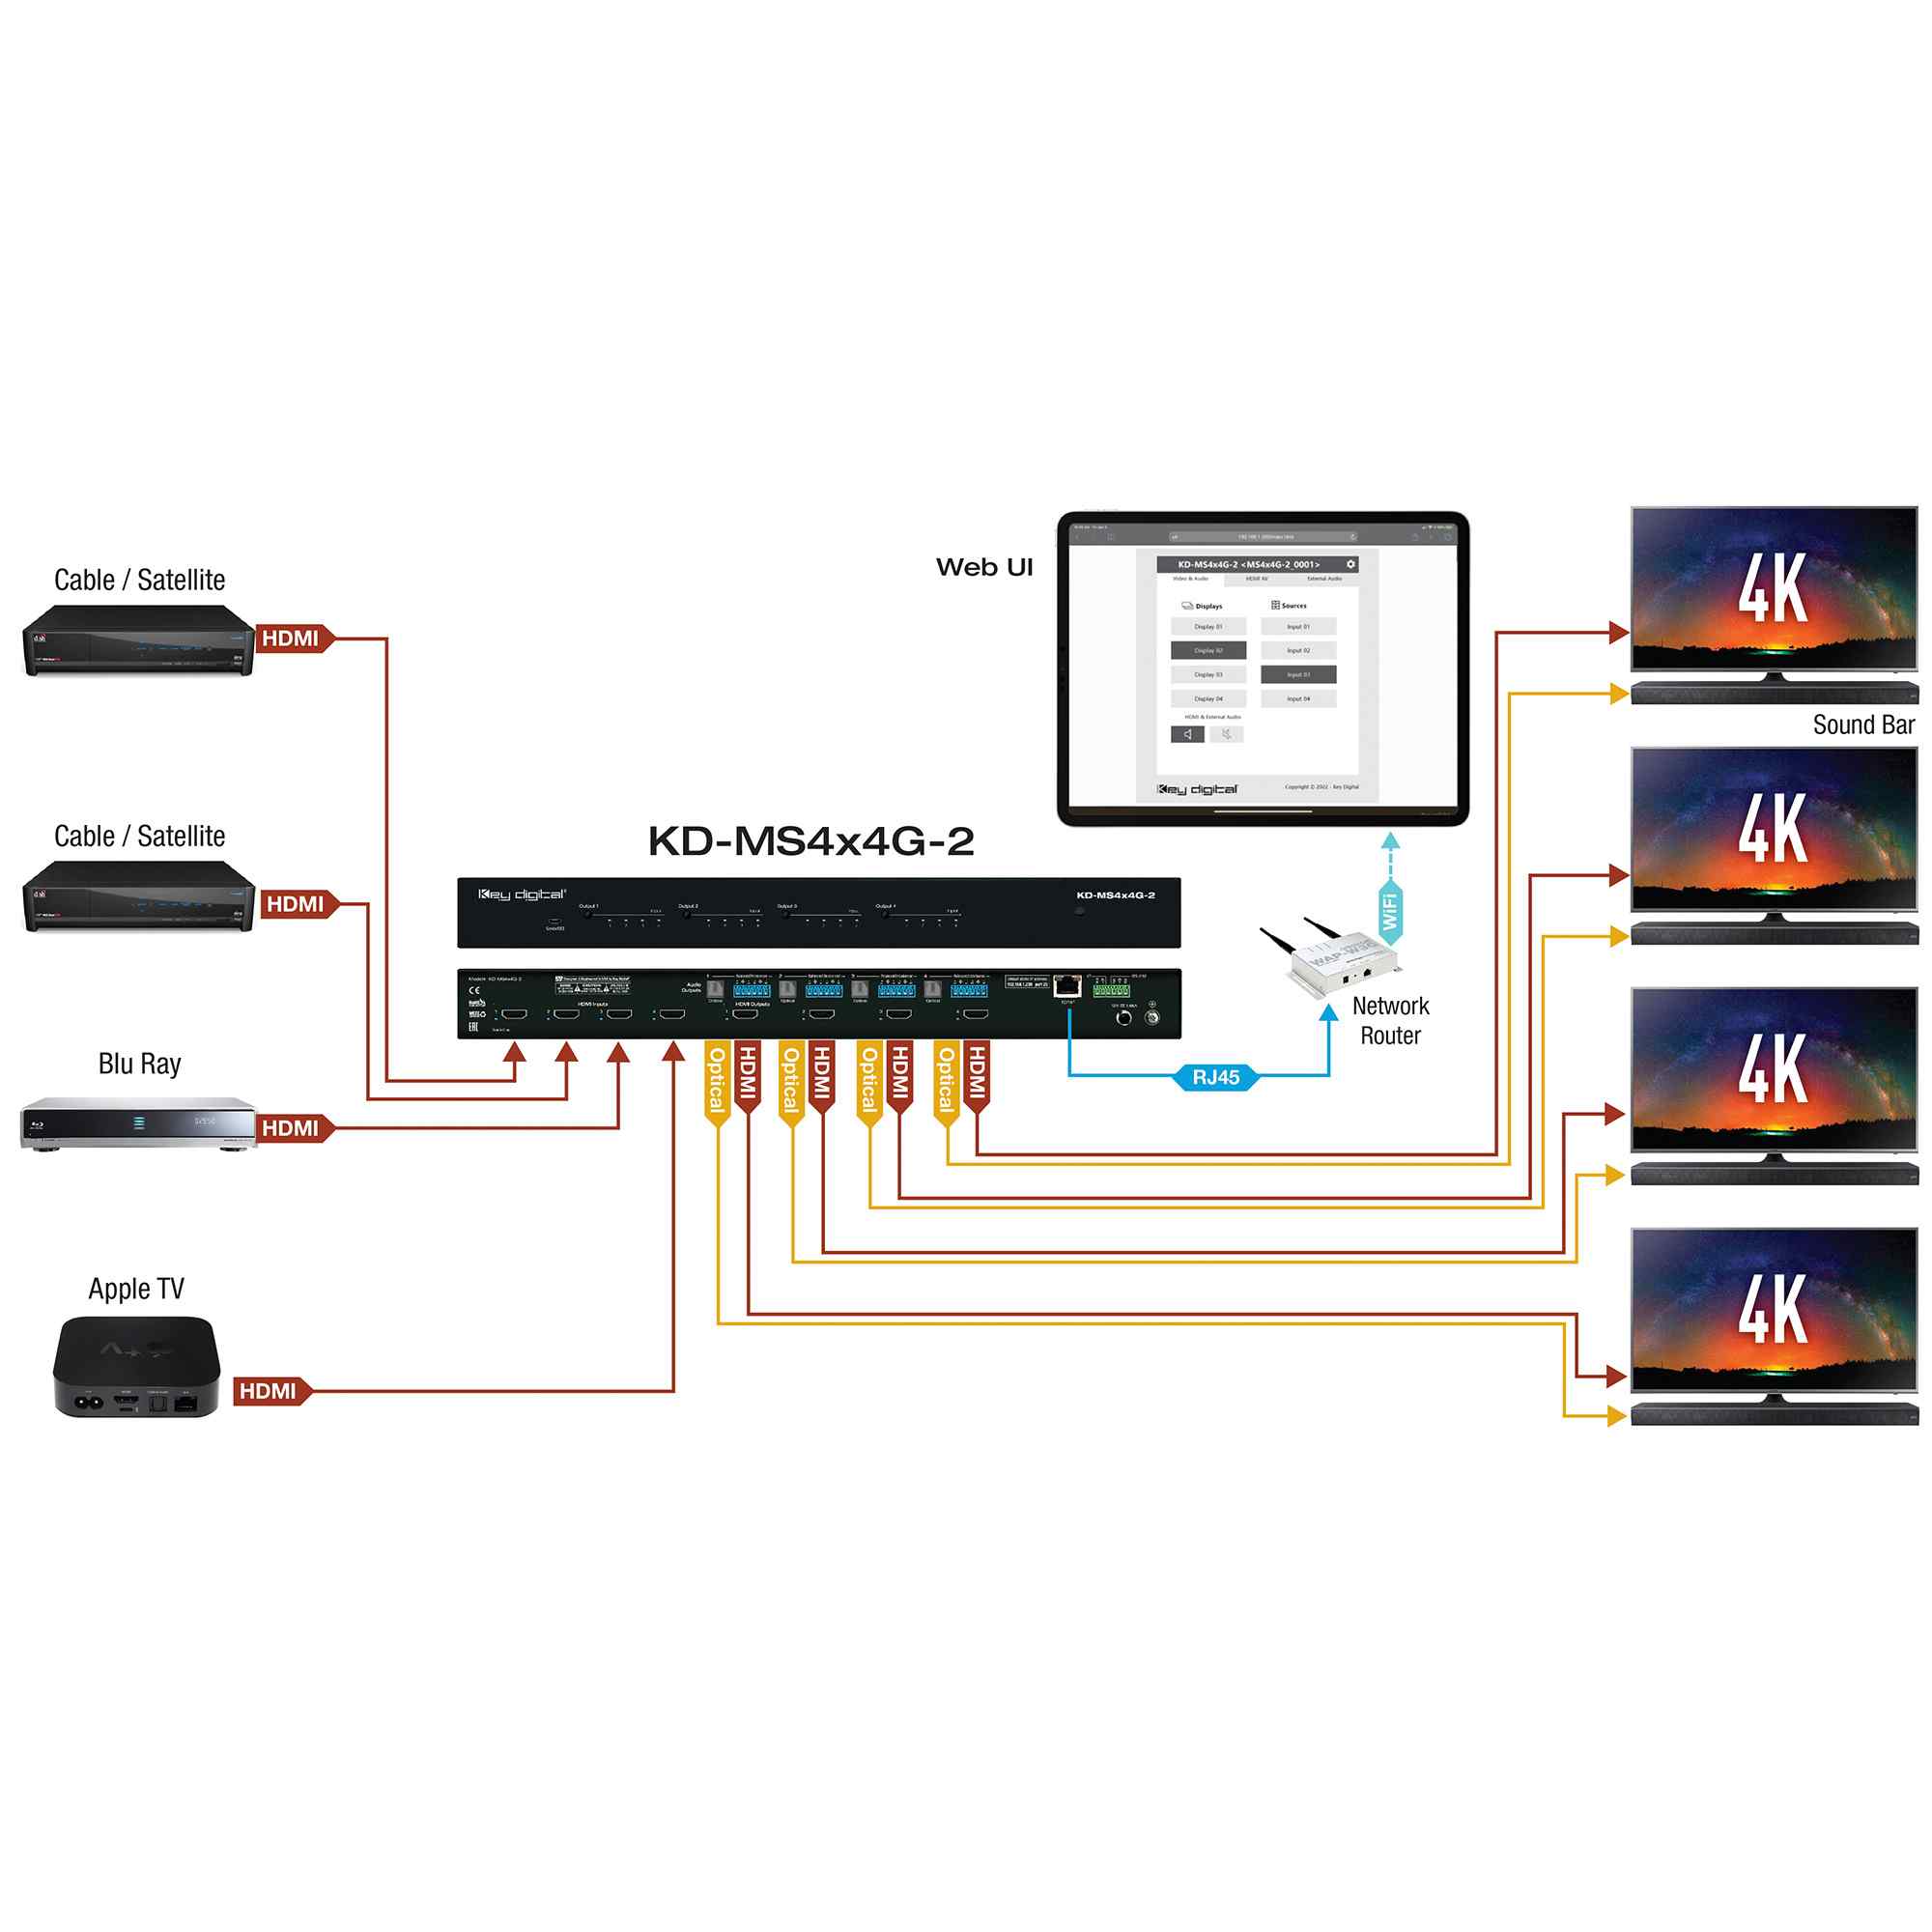 Thumbnail of KD-MS4x4G-2  hdmi matrix switcher 4x4 complete system example for patio & bar displays